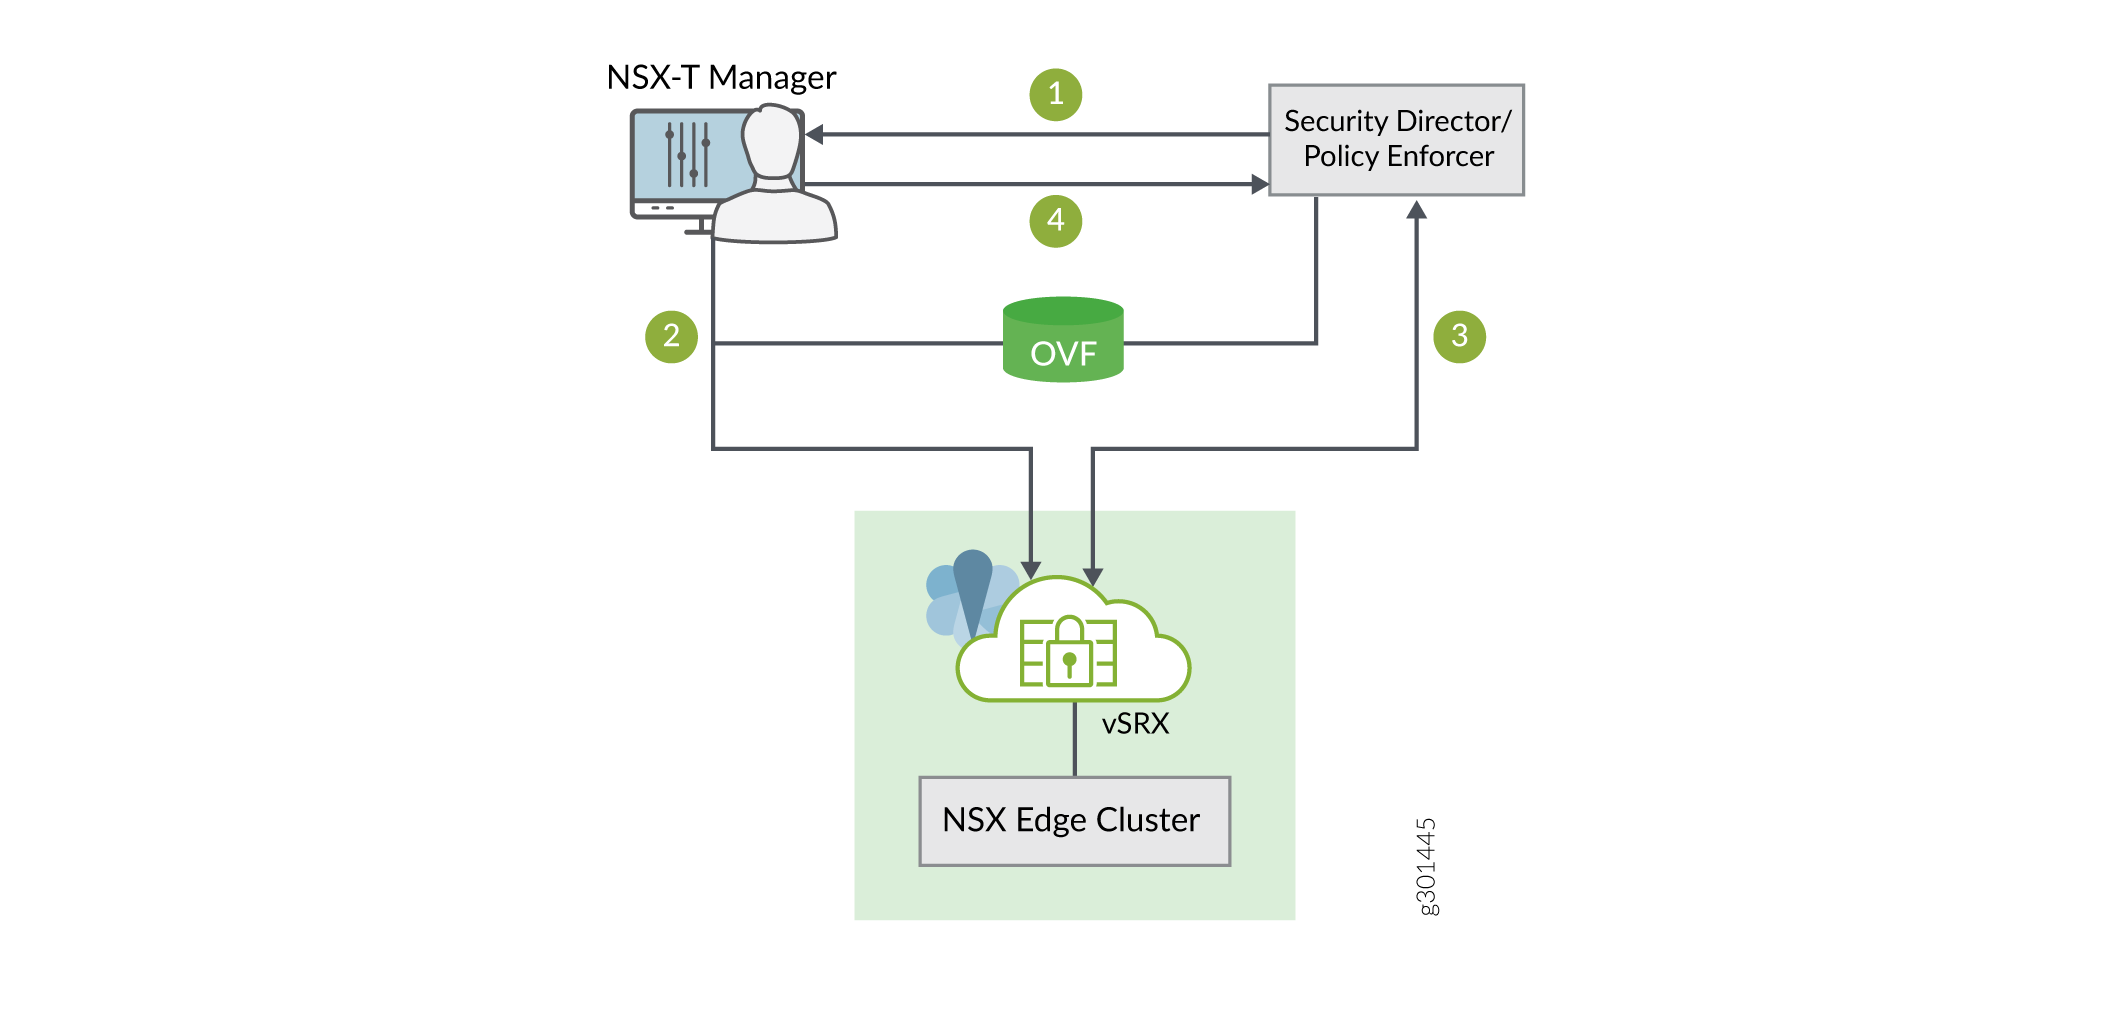 vSRX, Security Director, and VMware
NSX-T Integration Workflow